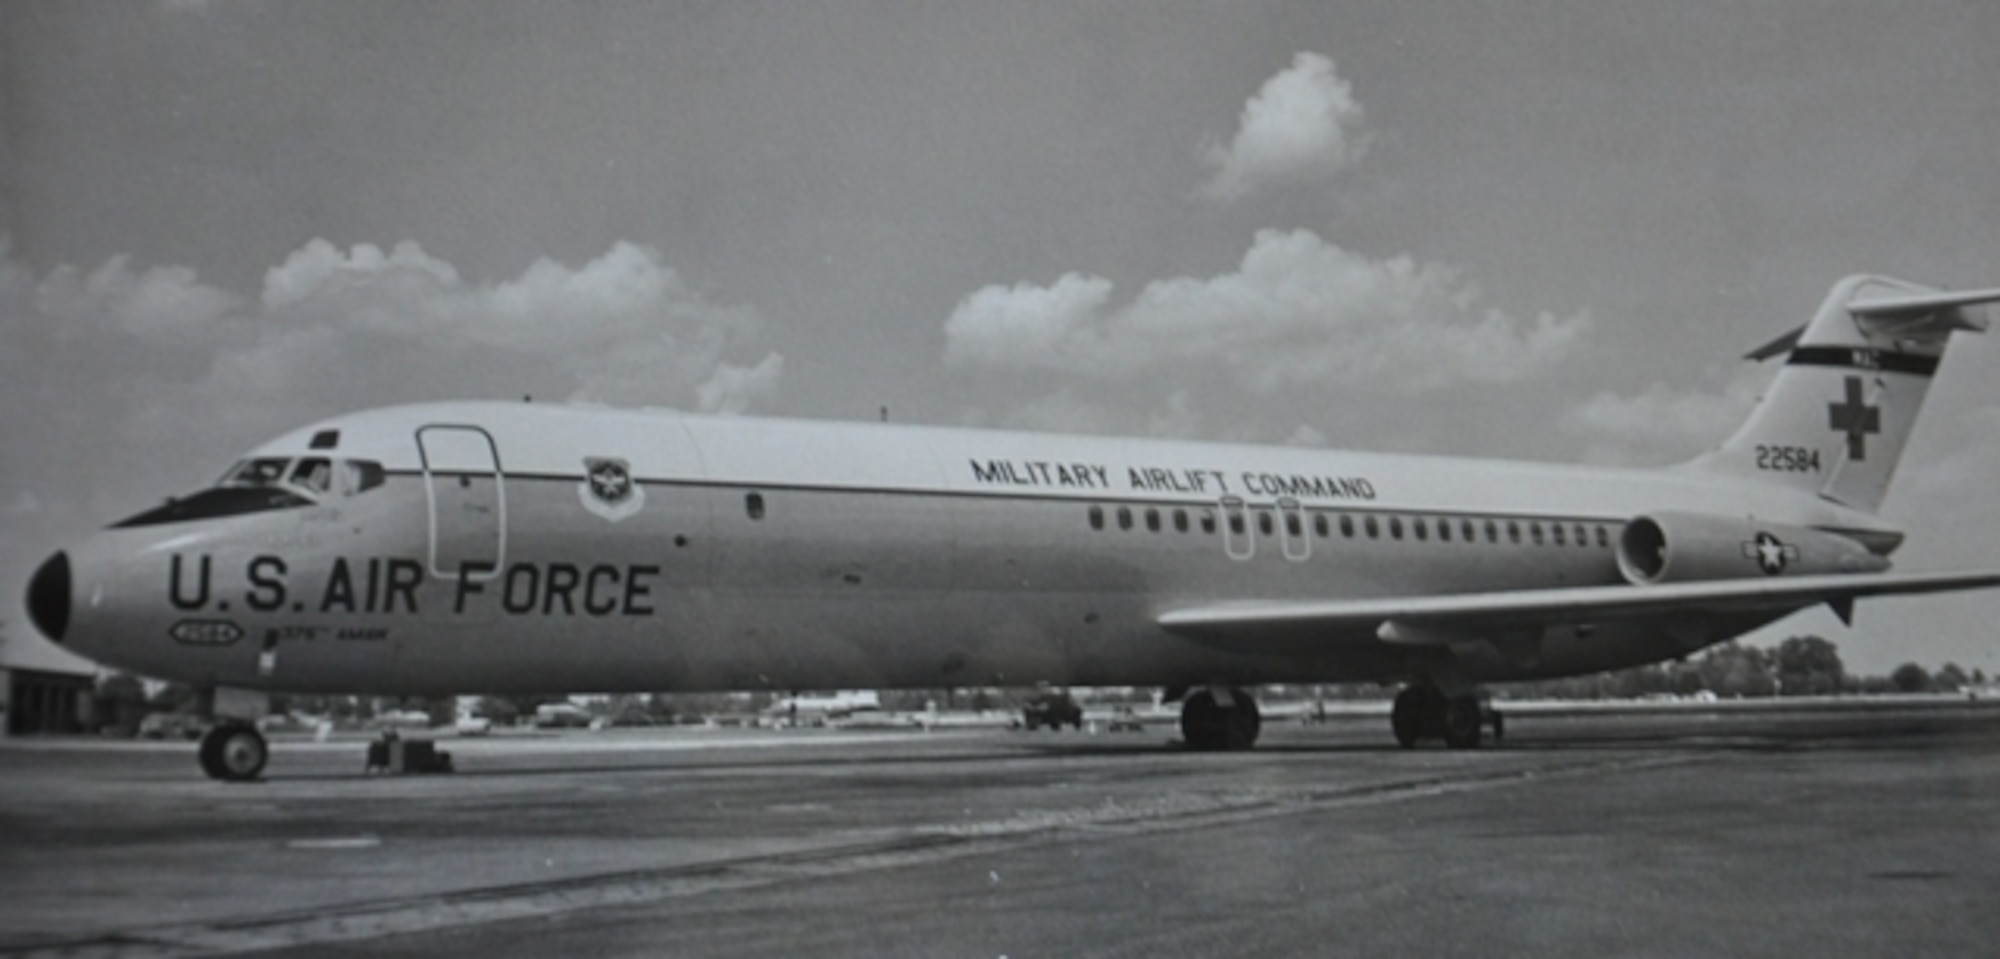 The C-9A Nightingale made its debut in 1968, landing at Scott Air Force Base, Ill. Created to be a dedicated aeromedical evacuation aircraft, the C-9A was equipped with advanced medical capabilities and faster speeds, which made it an effective addition to the U.S. Air Force’s aeromedical evacuation system. (U.S. Air Force photo)